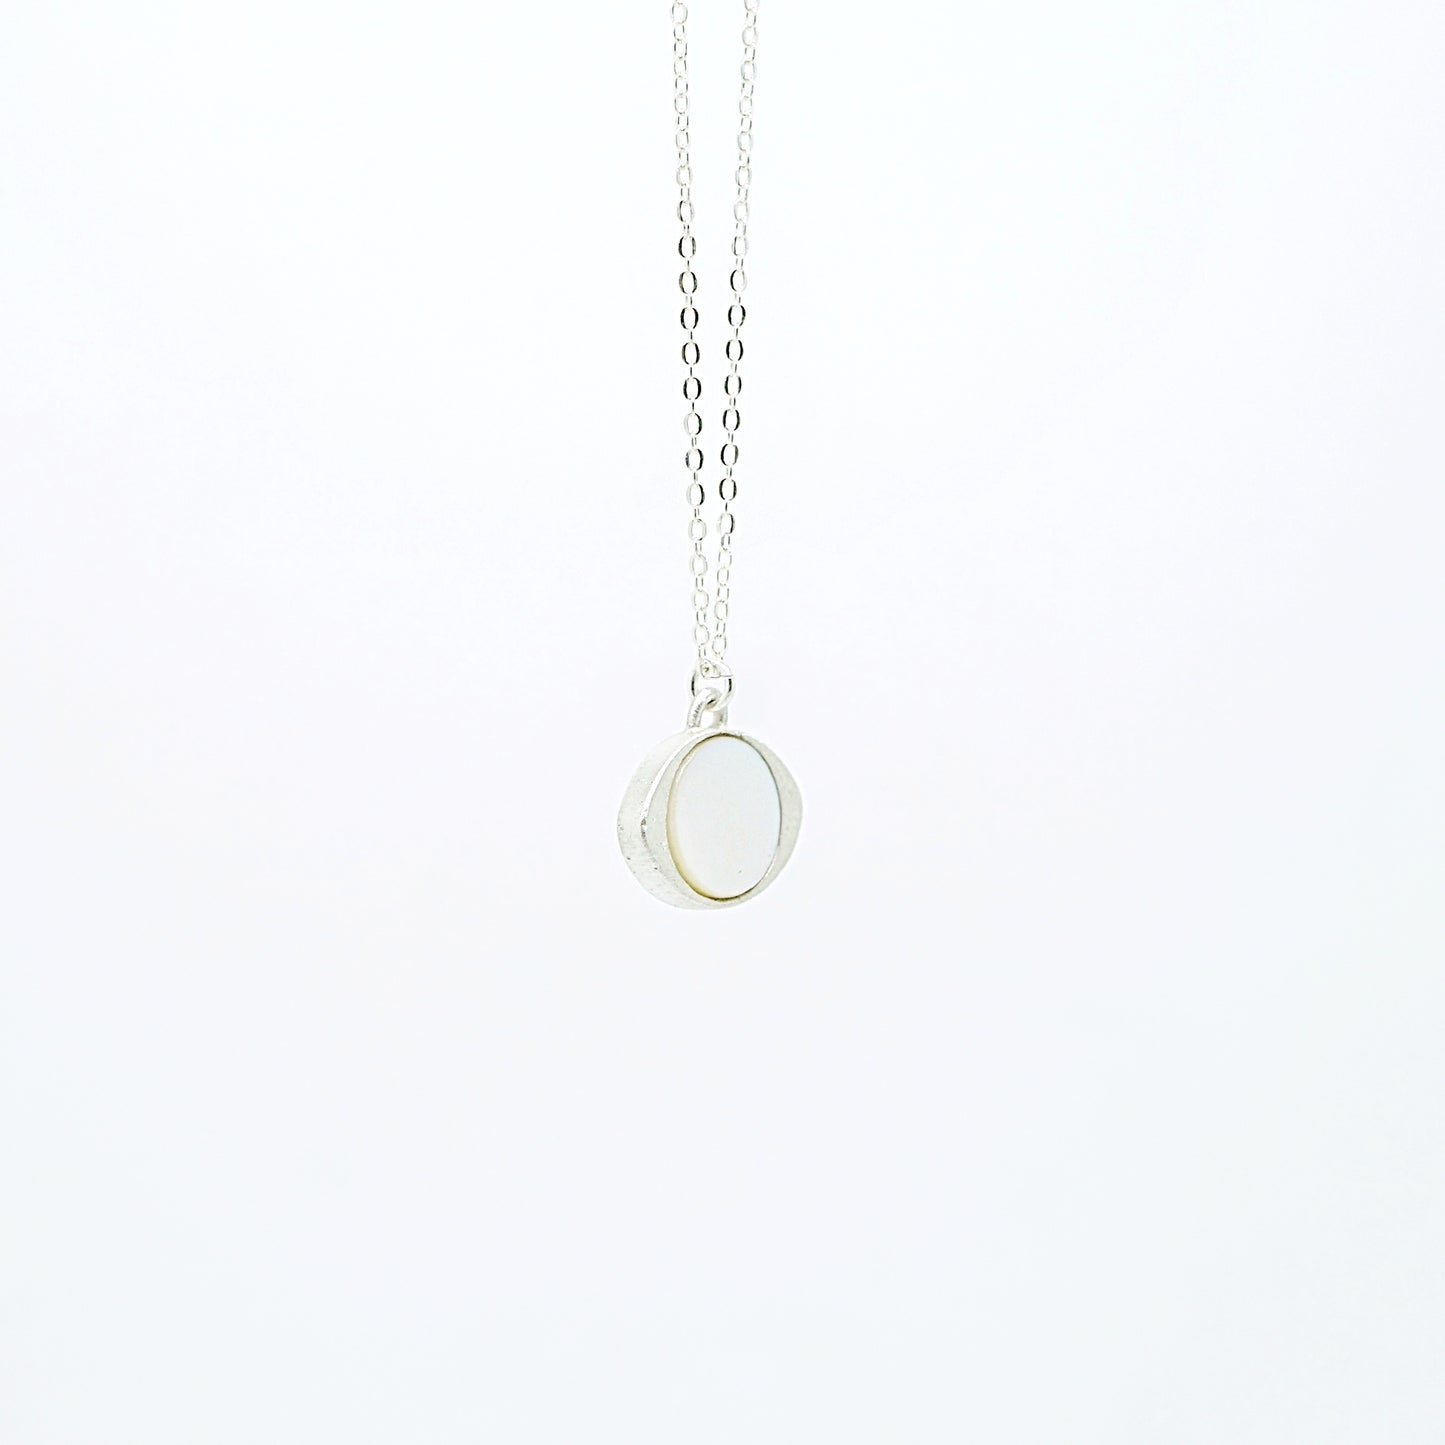 Mother of pearl eye pendant necklace